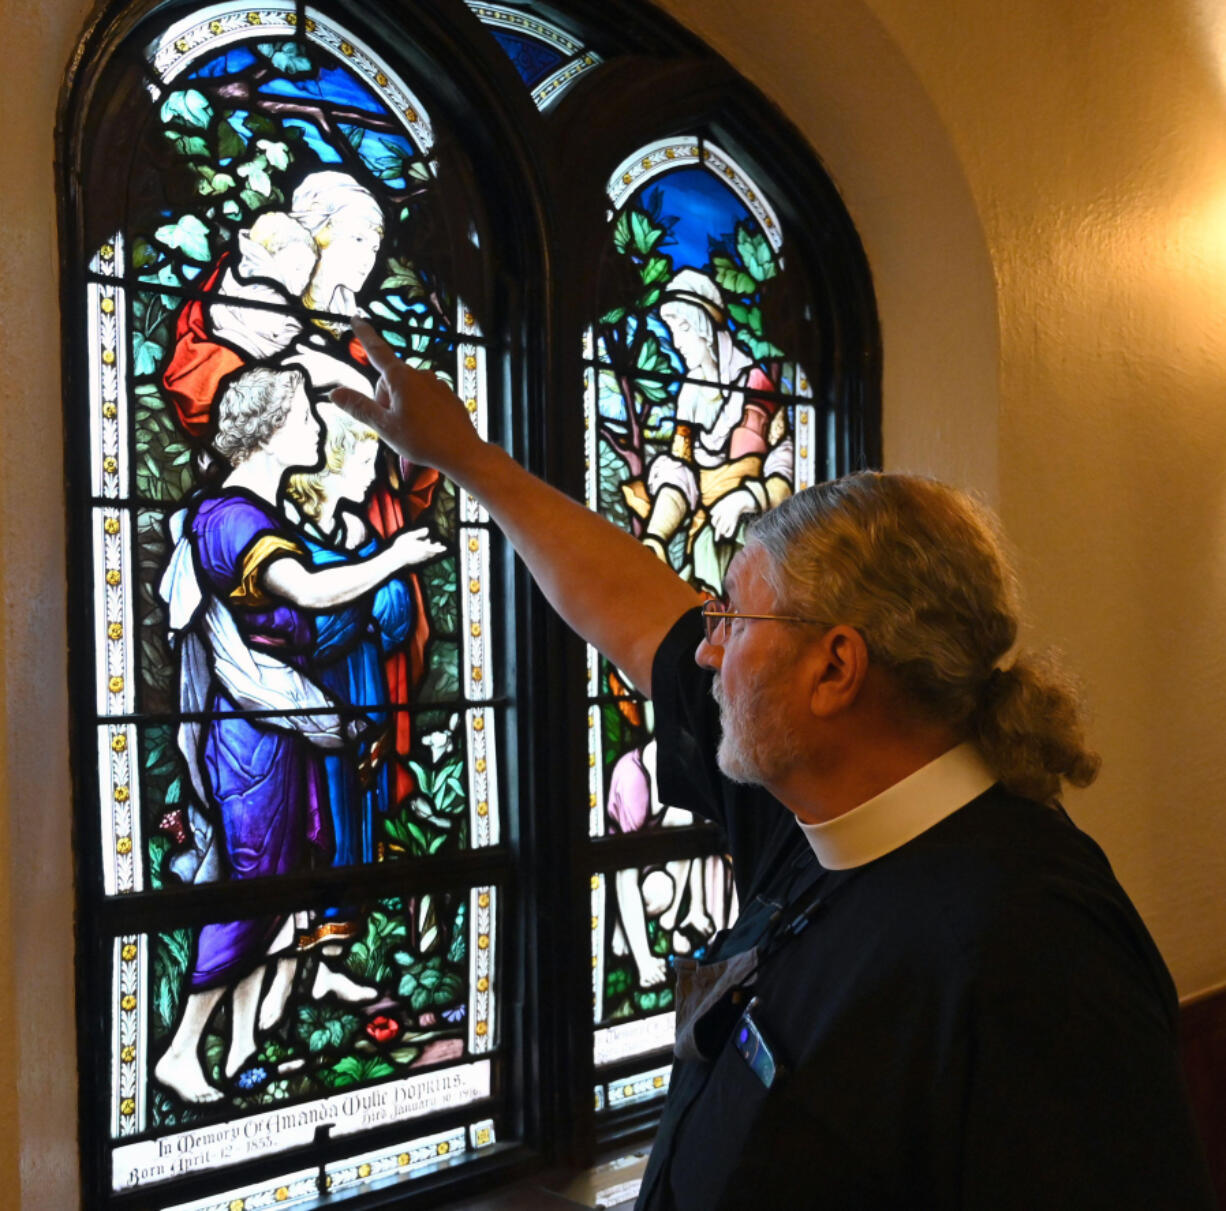 The Rev. Canon Dr. Mark Gatza, rector for Emmanuel Episcopal Church, talks about details in the glass as he explains the stories depicted in them during a tour of the church on Sept.